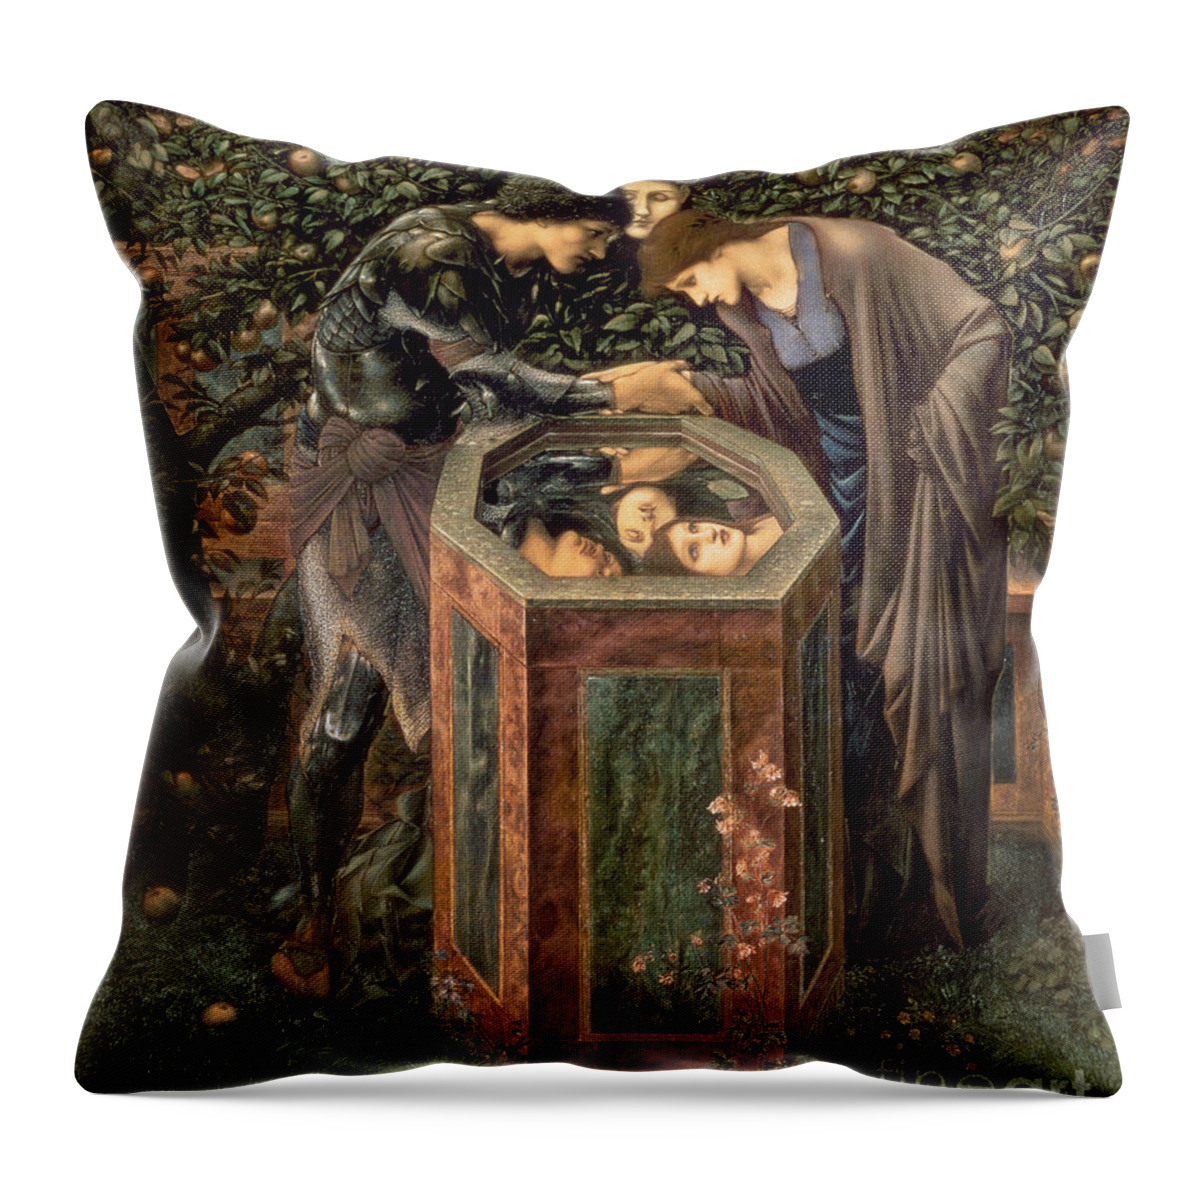 The Throw Pillow featuring the painting The Baleful Head by Edward Burne-Jones